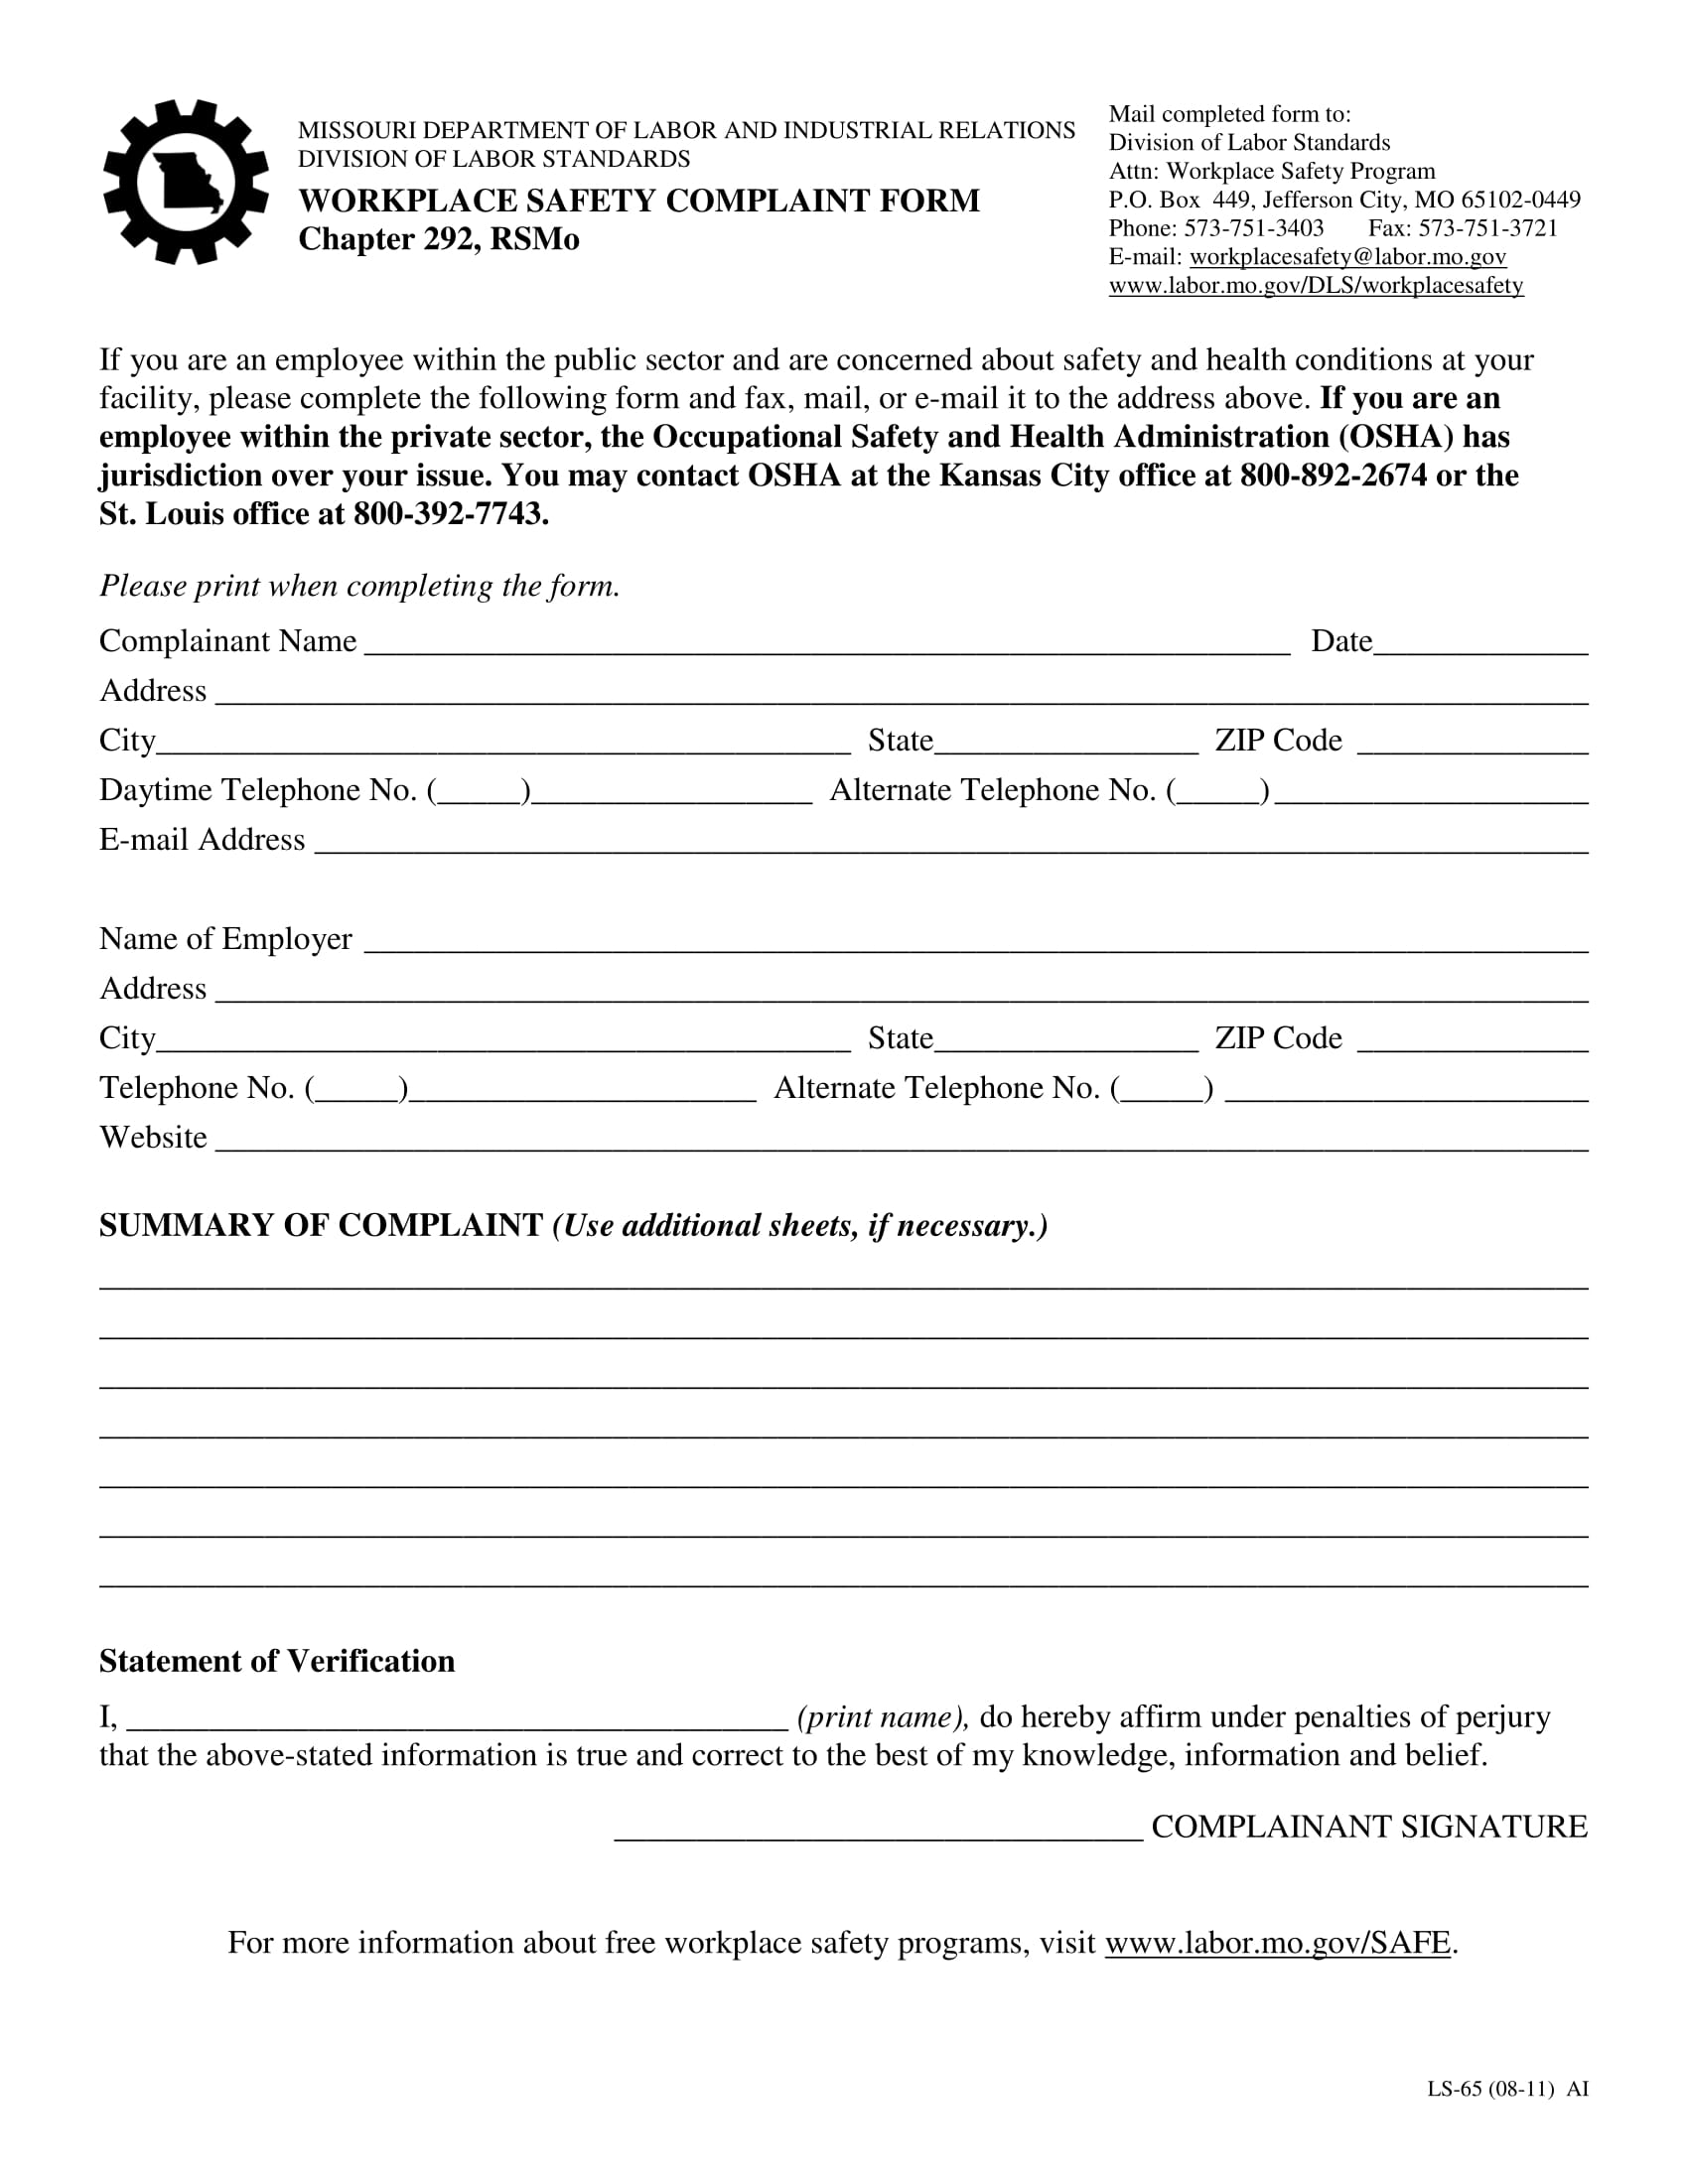 workplace safety complaint form 1